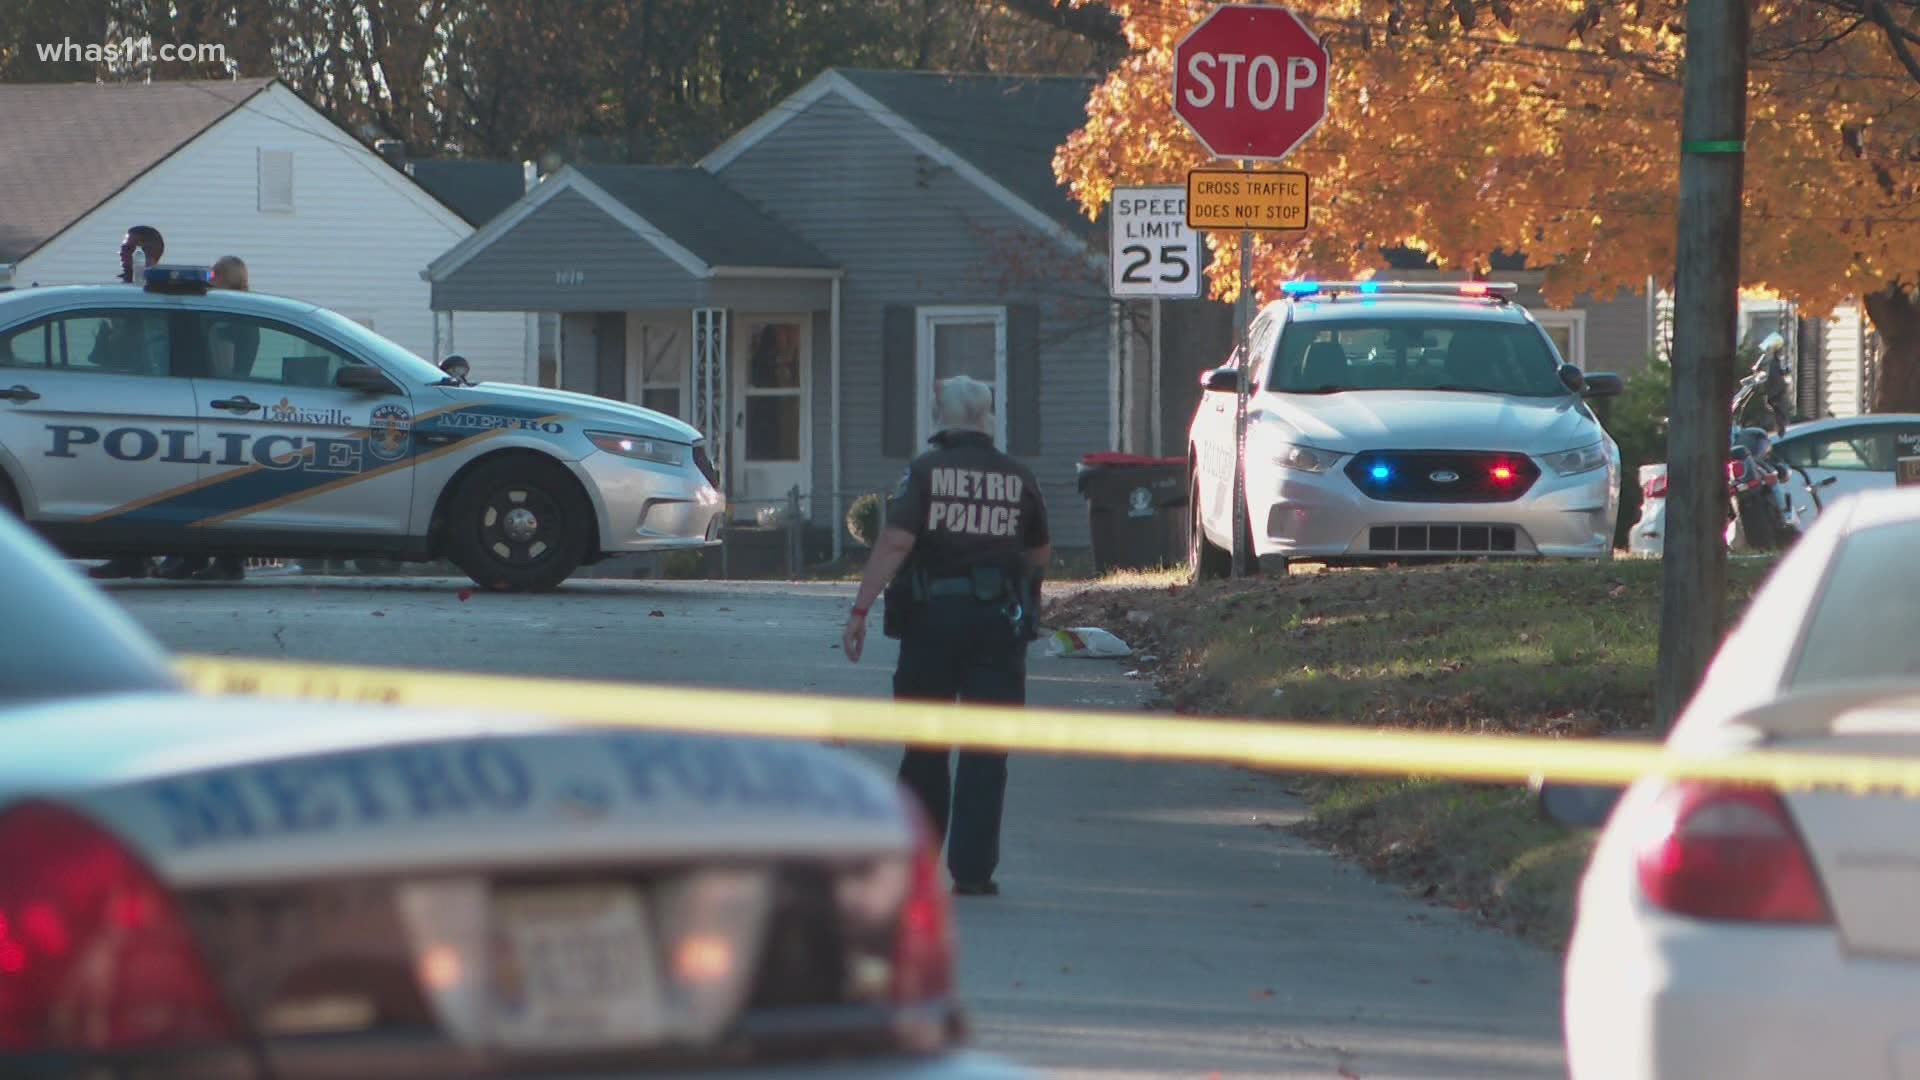 Police said the two victims were injured in the 1500 block of Clara Avenue Sunday afternoon.